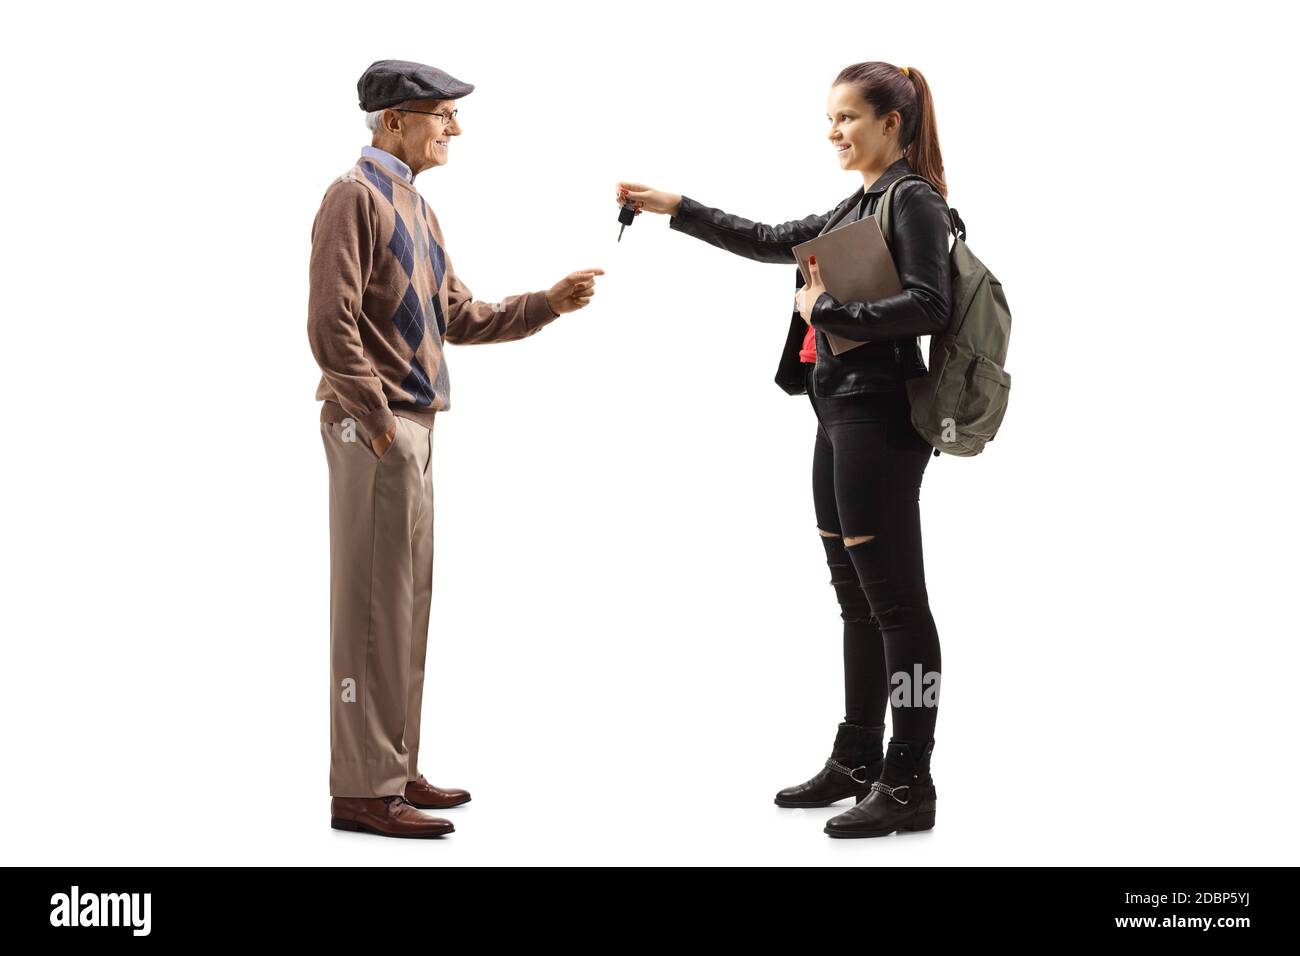 Full length profile shot of a female student giving car keys to an elderly man isolated on white background Stock Photo